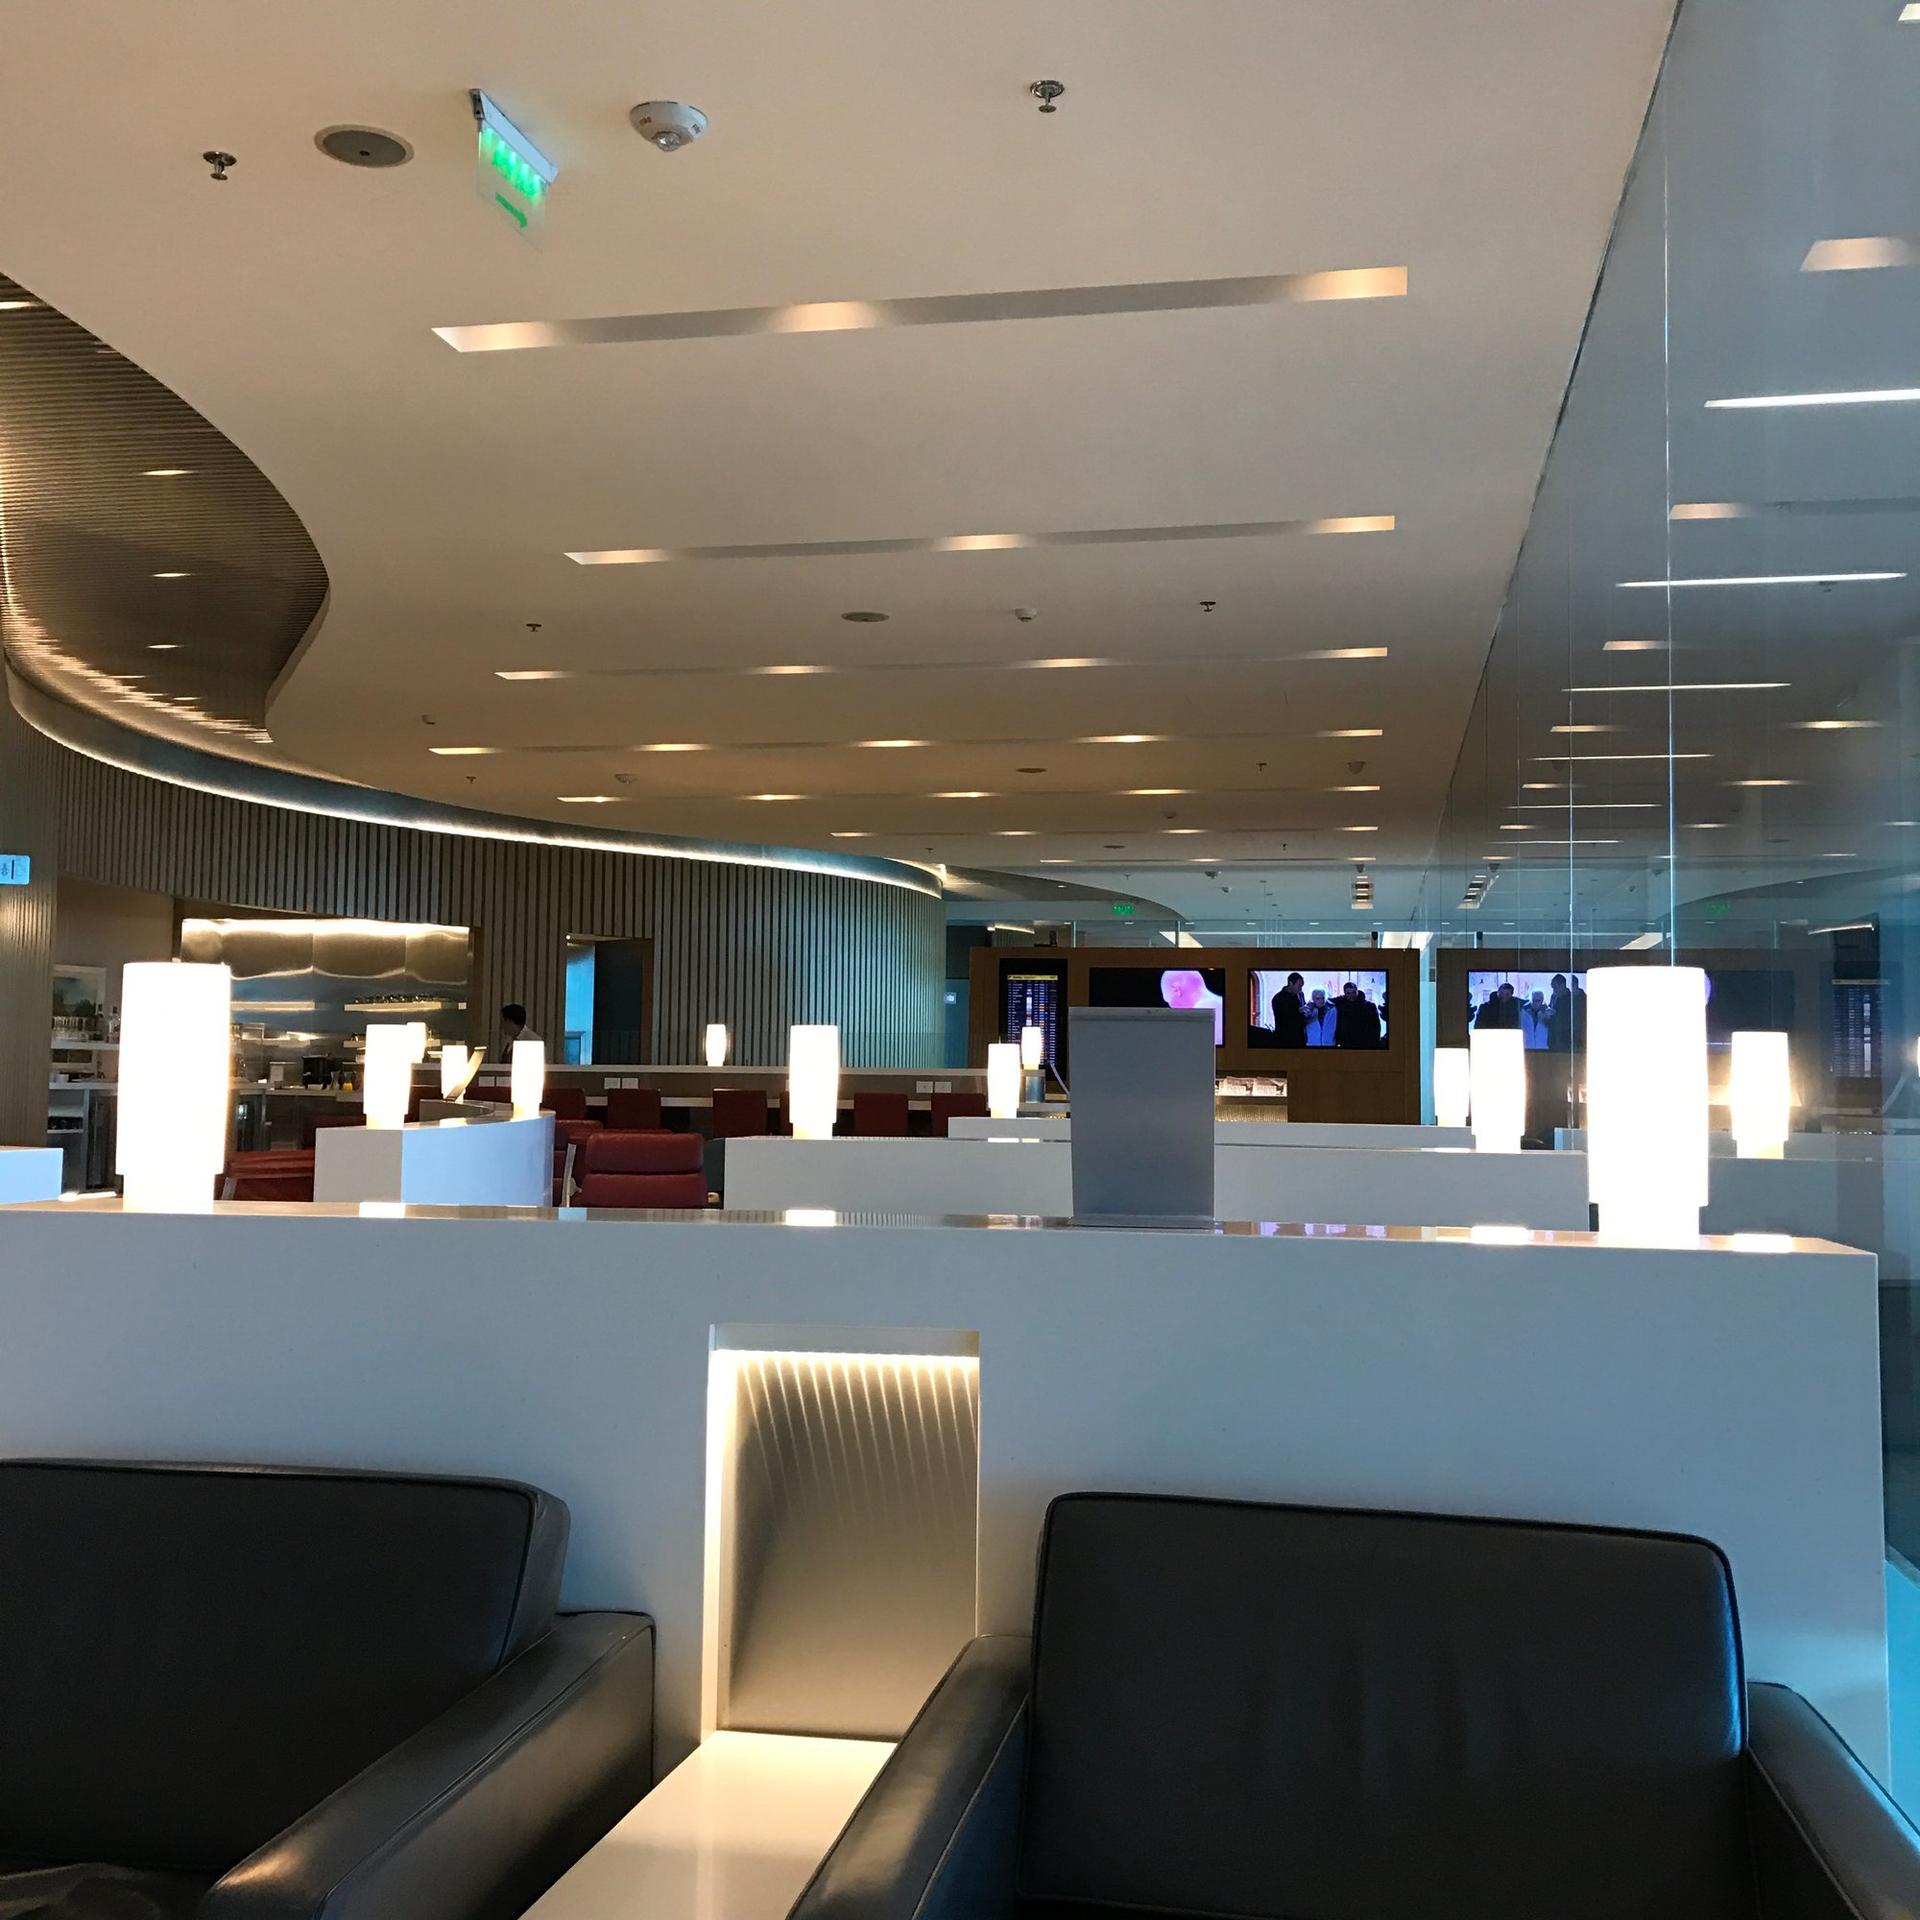 American Airlines Admirals Club & Iberia VIP Lounge image 15 of 18